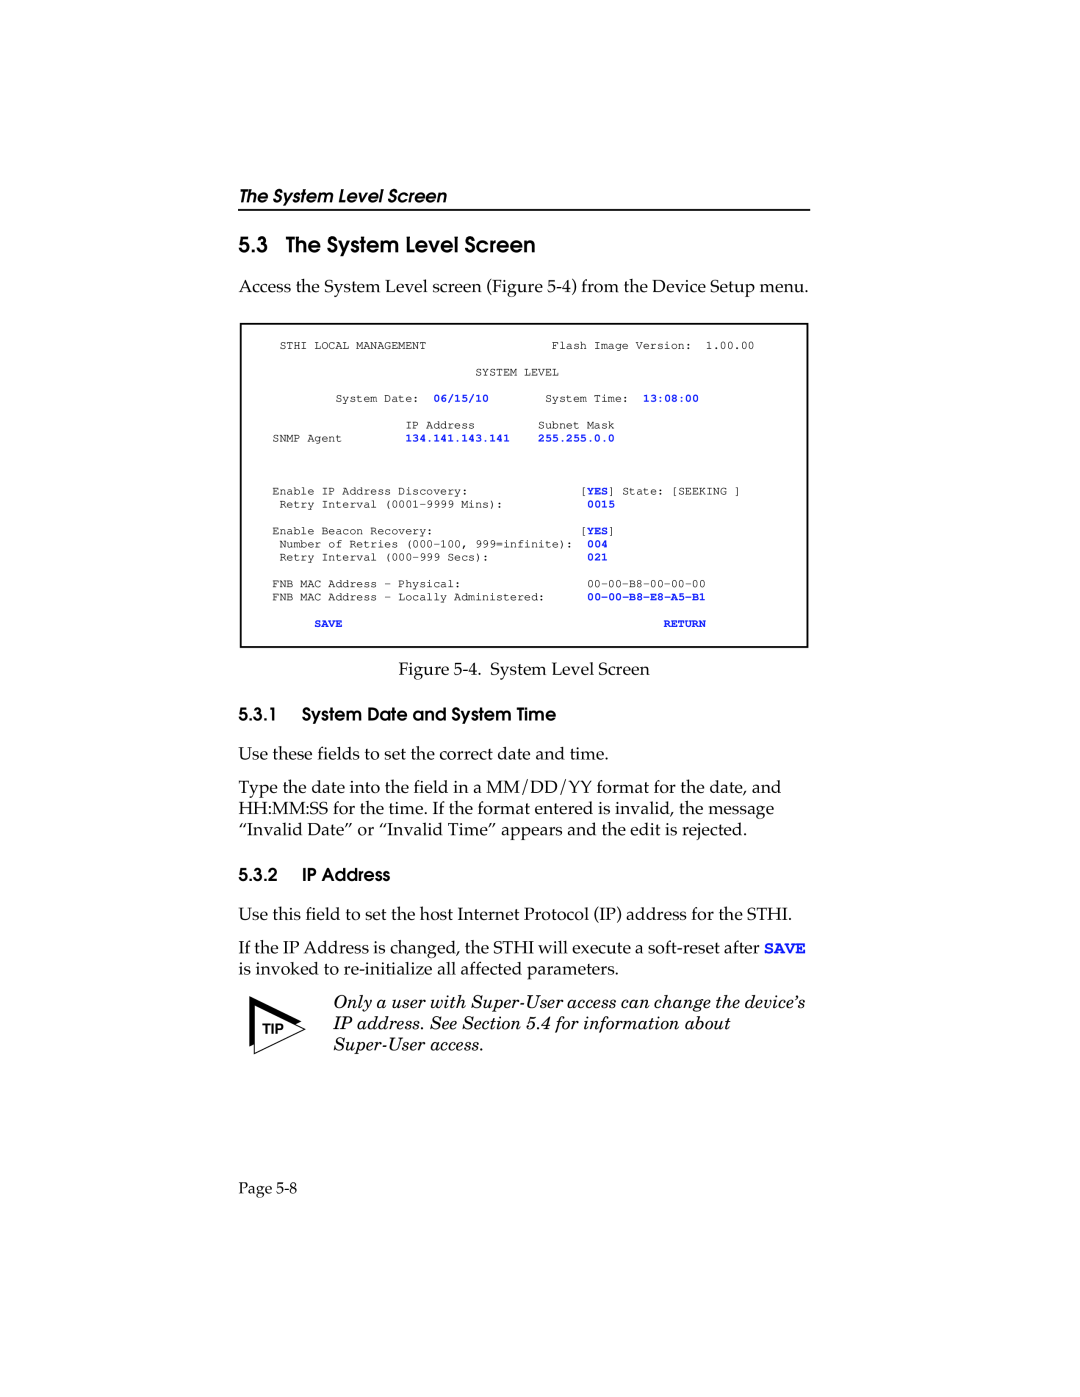 Cabletron Systems STHI manual The System Level Screen, System Date and System Time, IP Address 